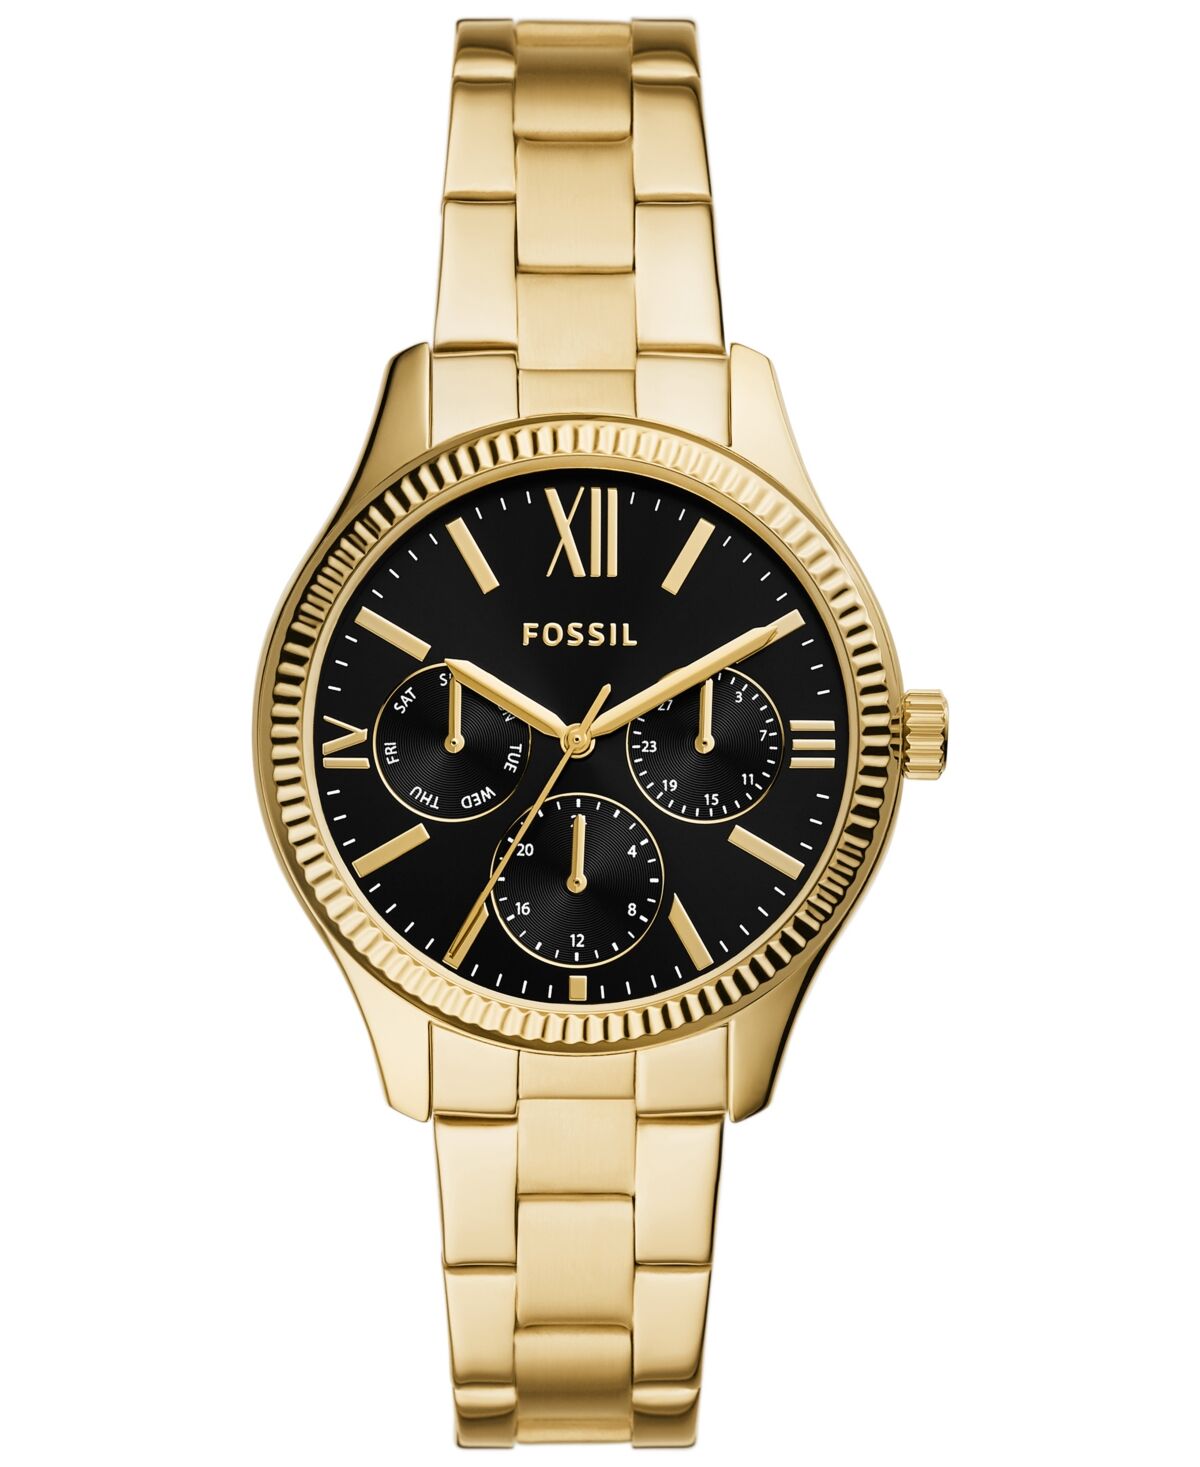 Fossil Women's Rye Multifunction Gold-Tone Stainless Steel Watch, 36mm - Gold-Tone